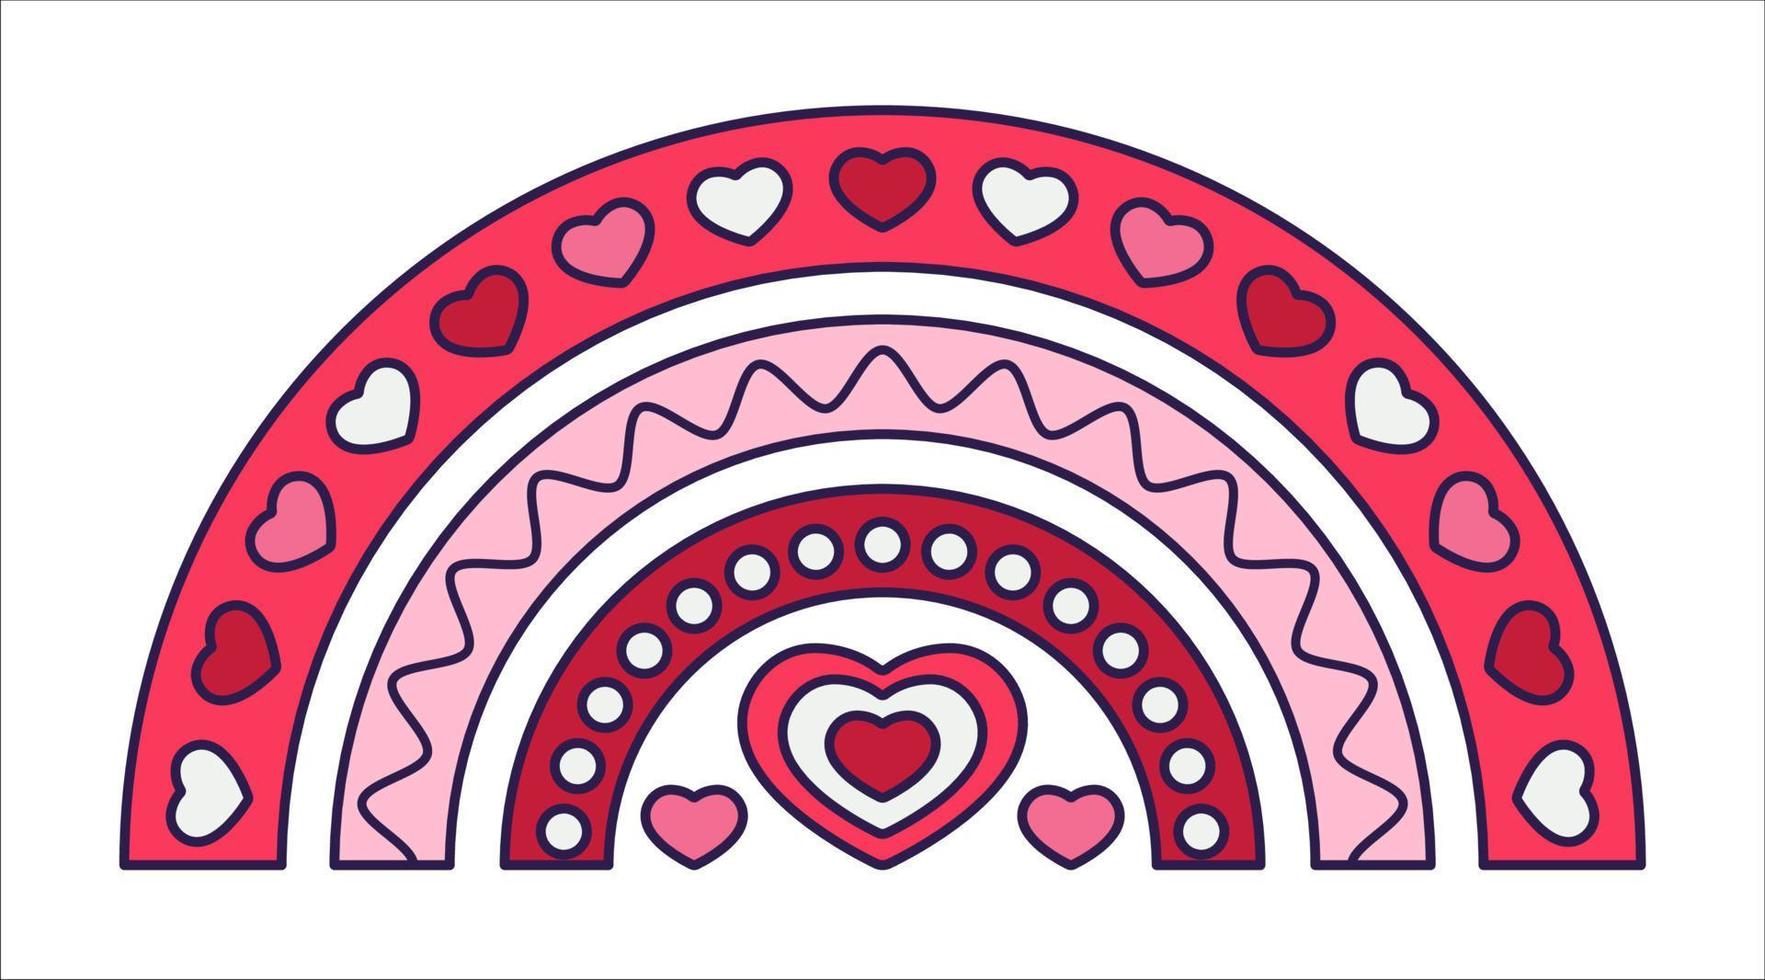 Retro Valentine Day boho icon of the hot-air balloon. Love symbols in the fashionable pop line art style. The figure of heart balloon in soft pink, red and coral color. Vector illustration isolated.